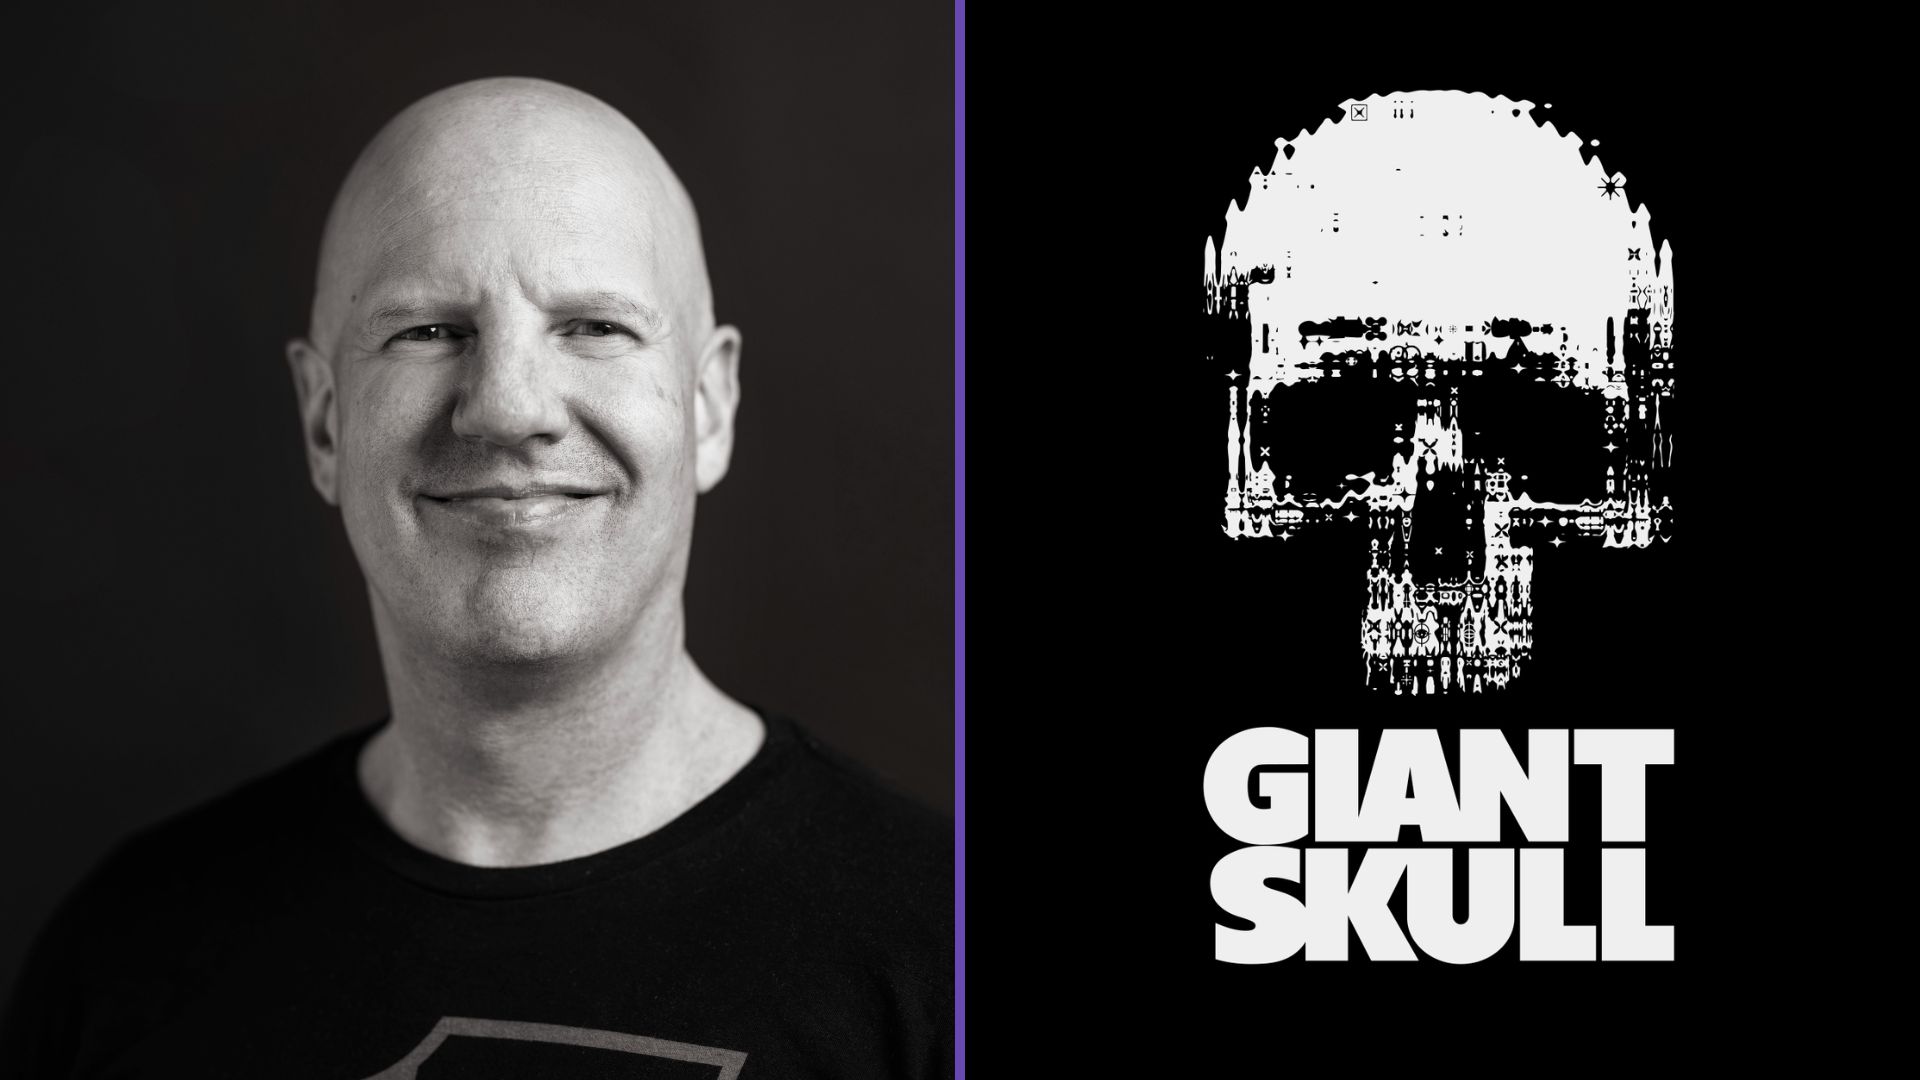 God Of War 3 Director Stig Asmussen Launches Giant Skull, Their Website Is The Craziest Thing You’ve Ever Seen